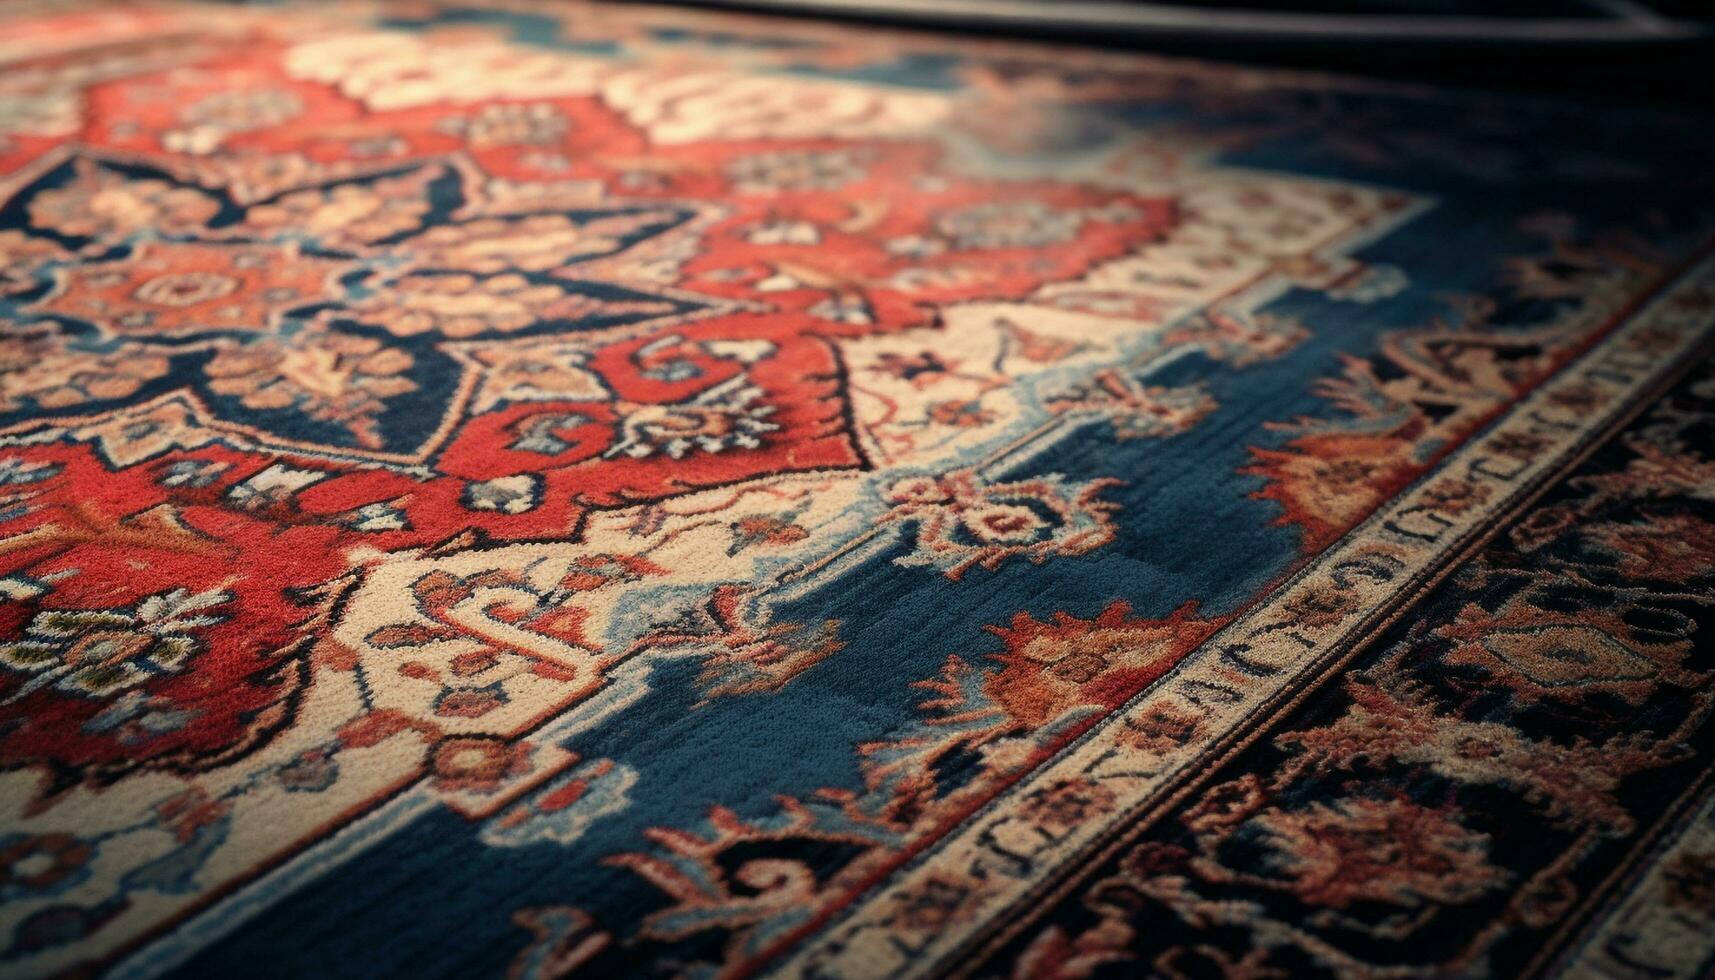 Turkish carpet, Persian rug, woven tapestry a cultural masterpiece generated by AI photo